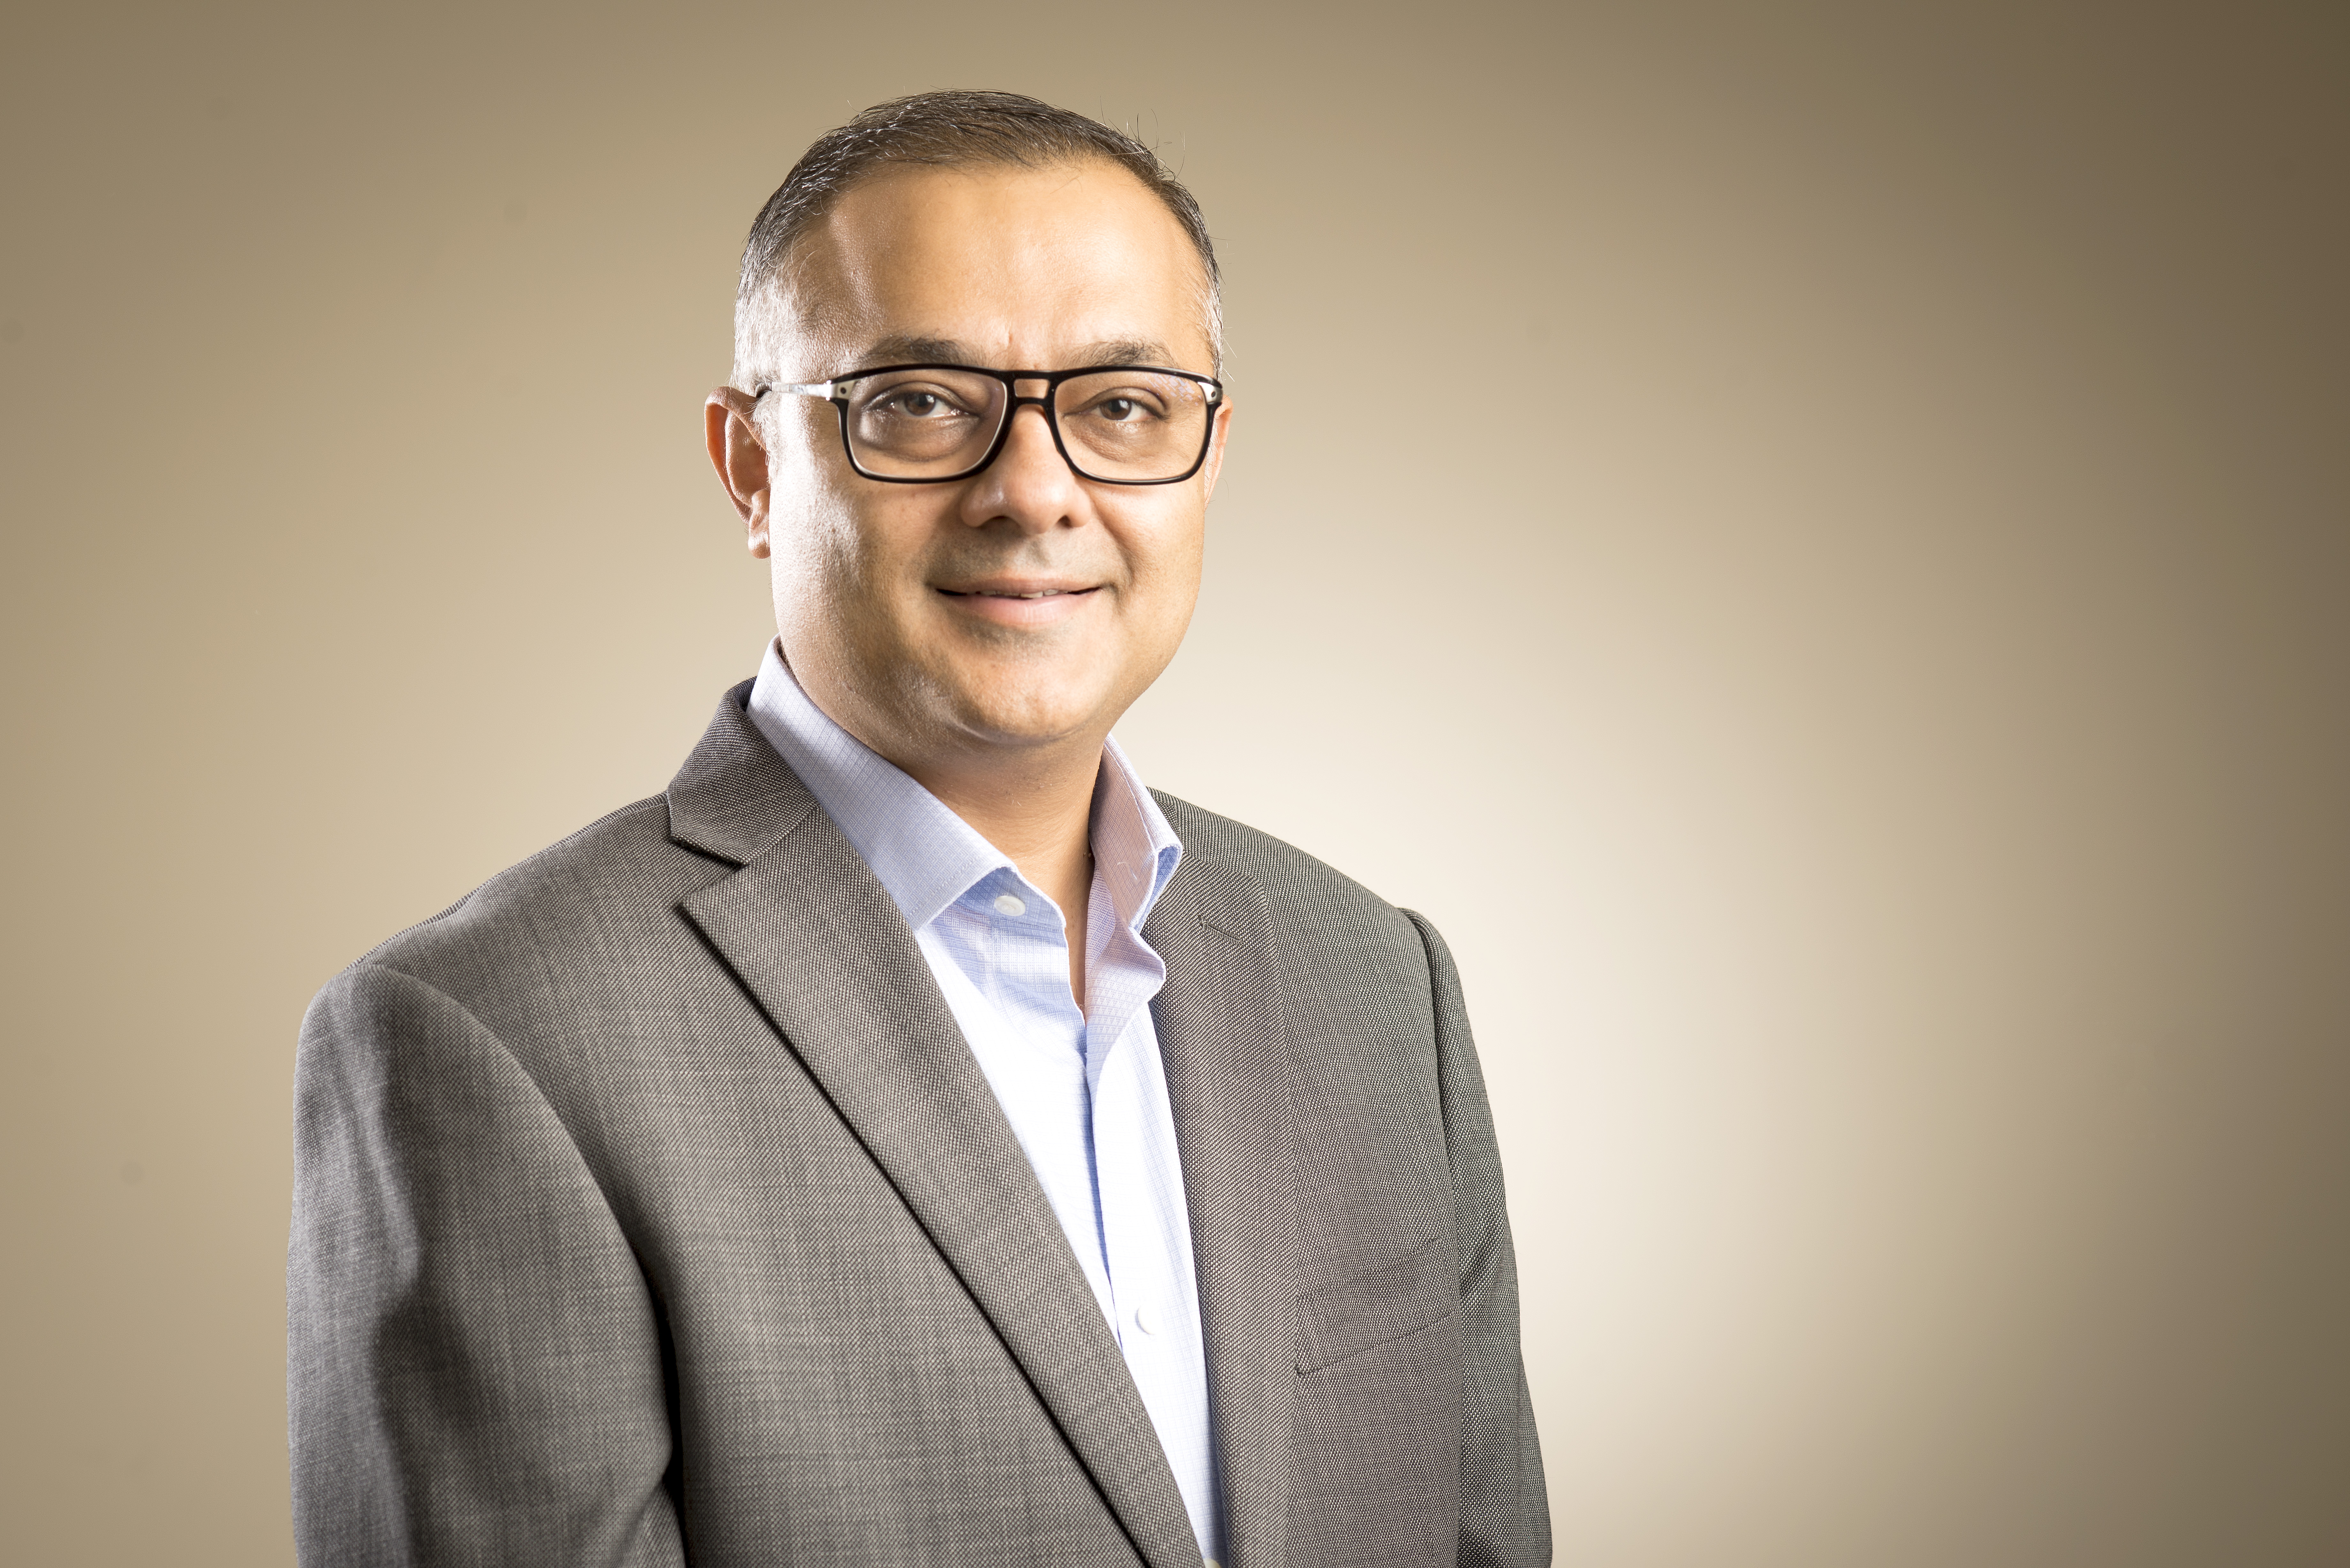 Mohit Anand, <span>Managing Director <br/> Kellogg India & South Asia</span>